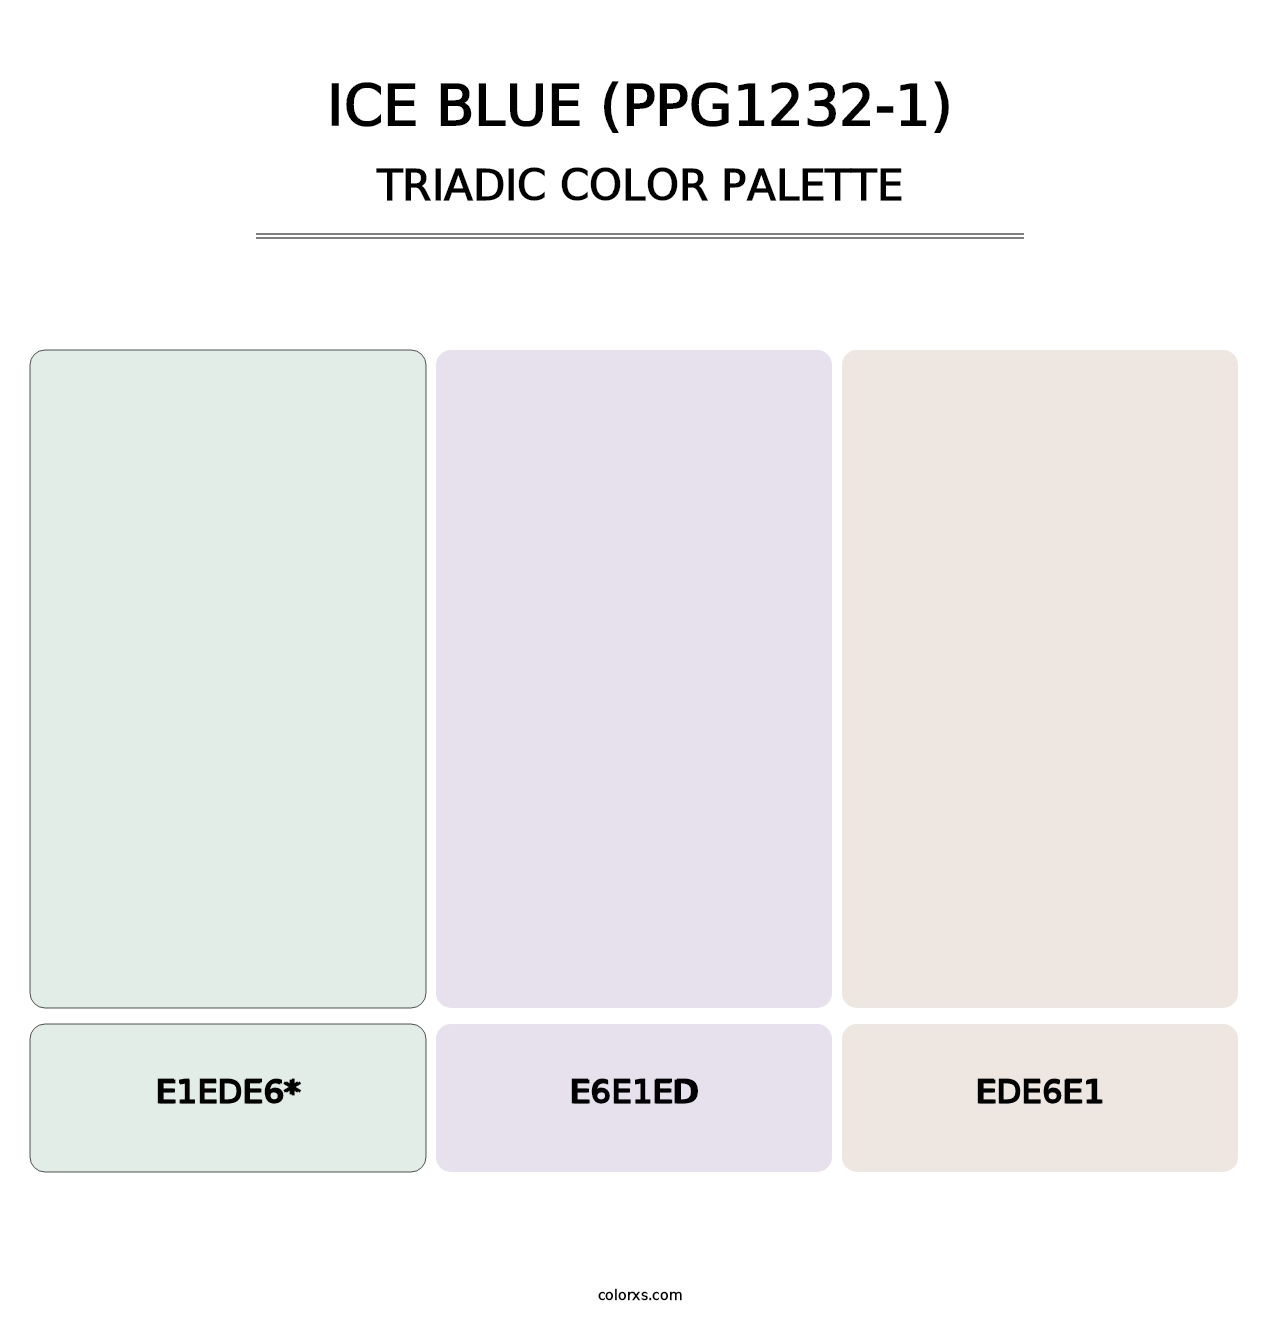 Ice Blue (PPG1232-1) - Triadic Color Palette